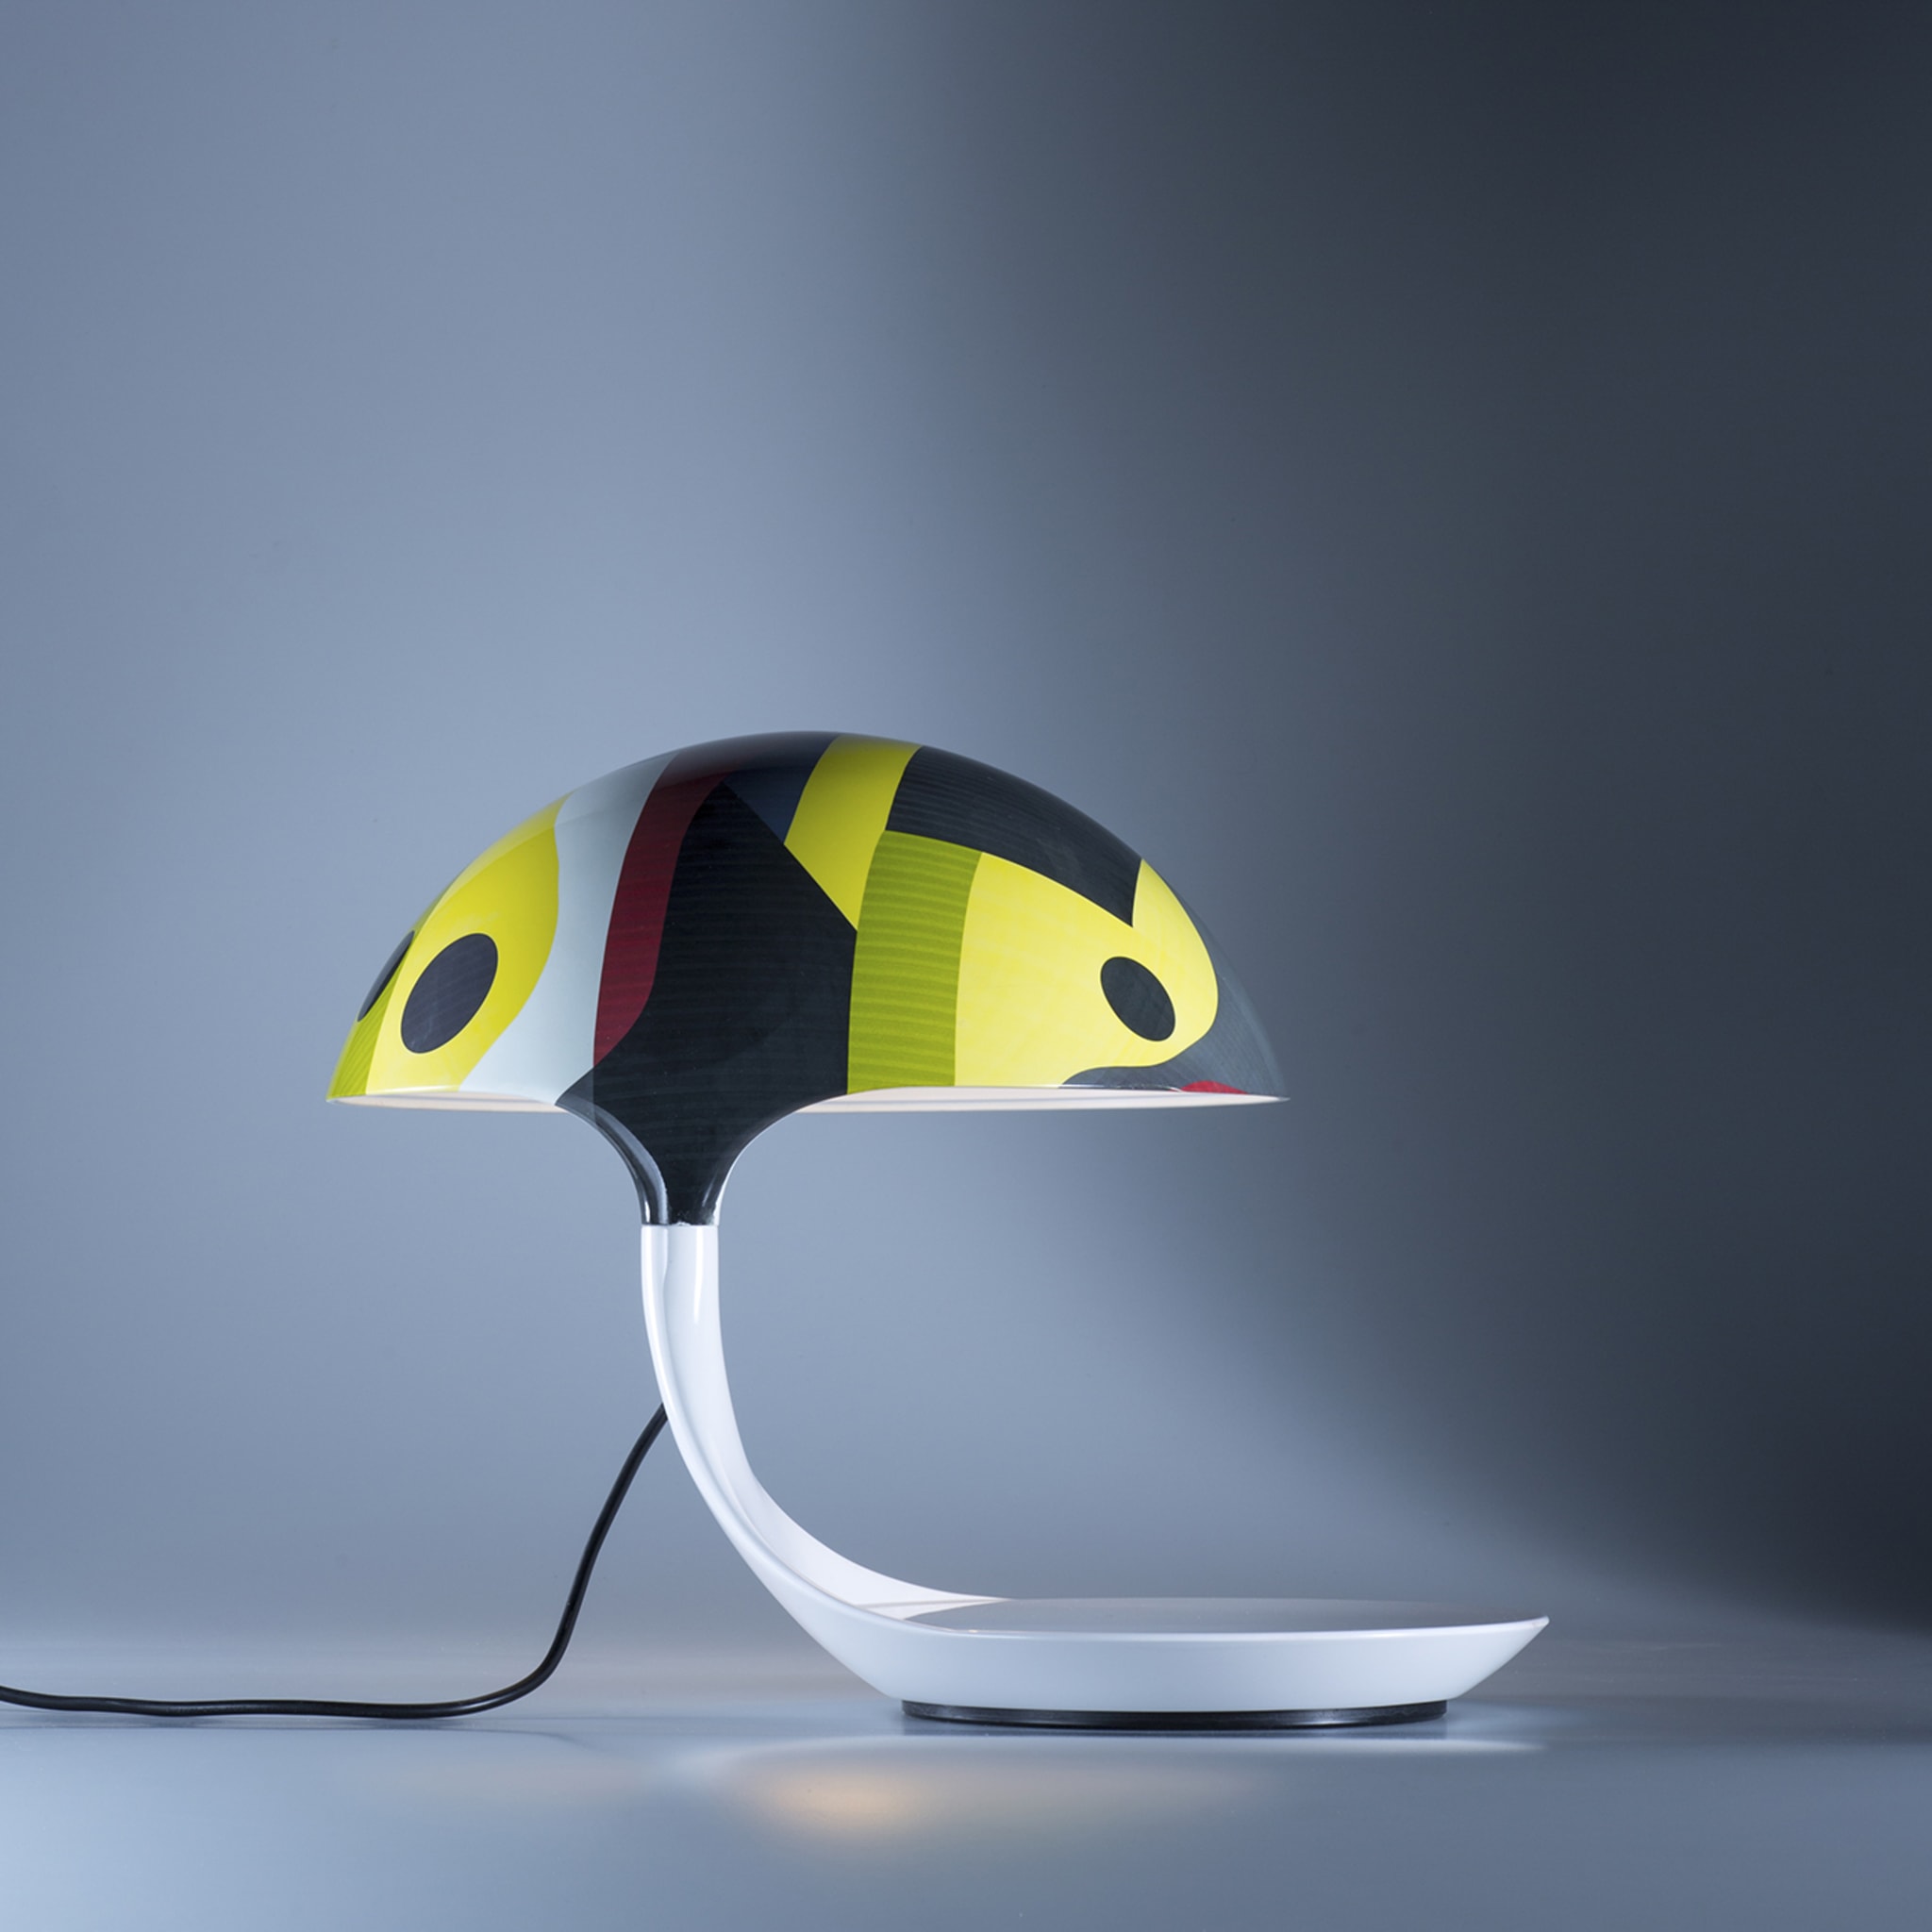 Cobra Texture Polychrome Table Lamp by Alessandro Guerriero - Alternative view 1